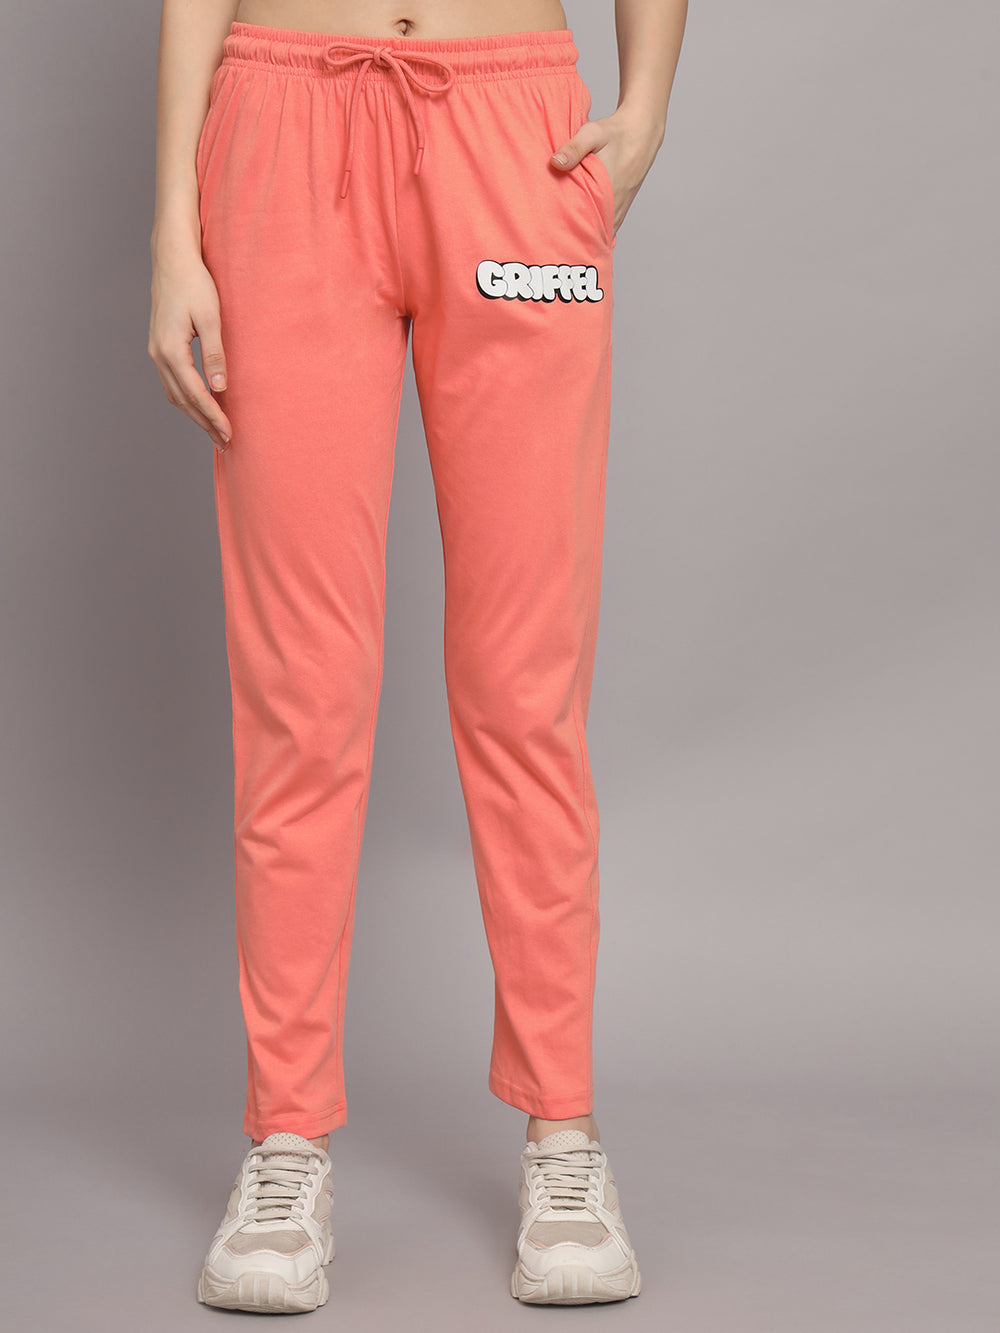 GRIFFEL Women Printed Oversized Loose fit Peach T-shirt and Trackpant Set - griffel